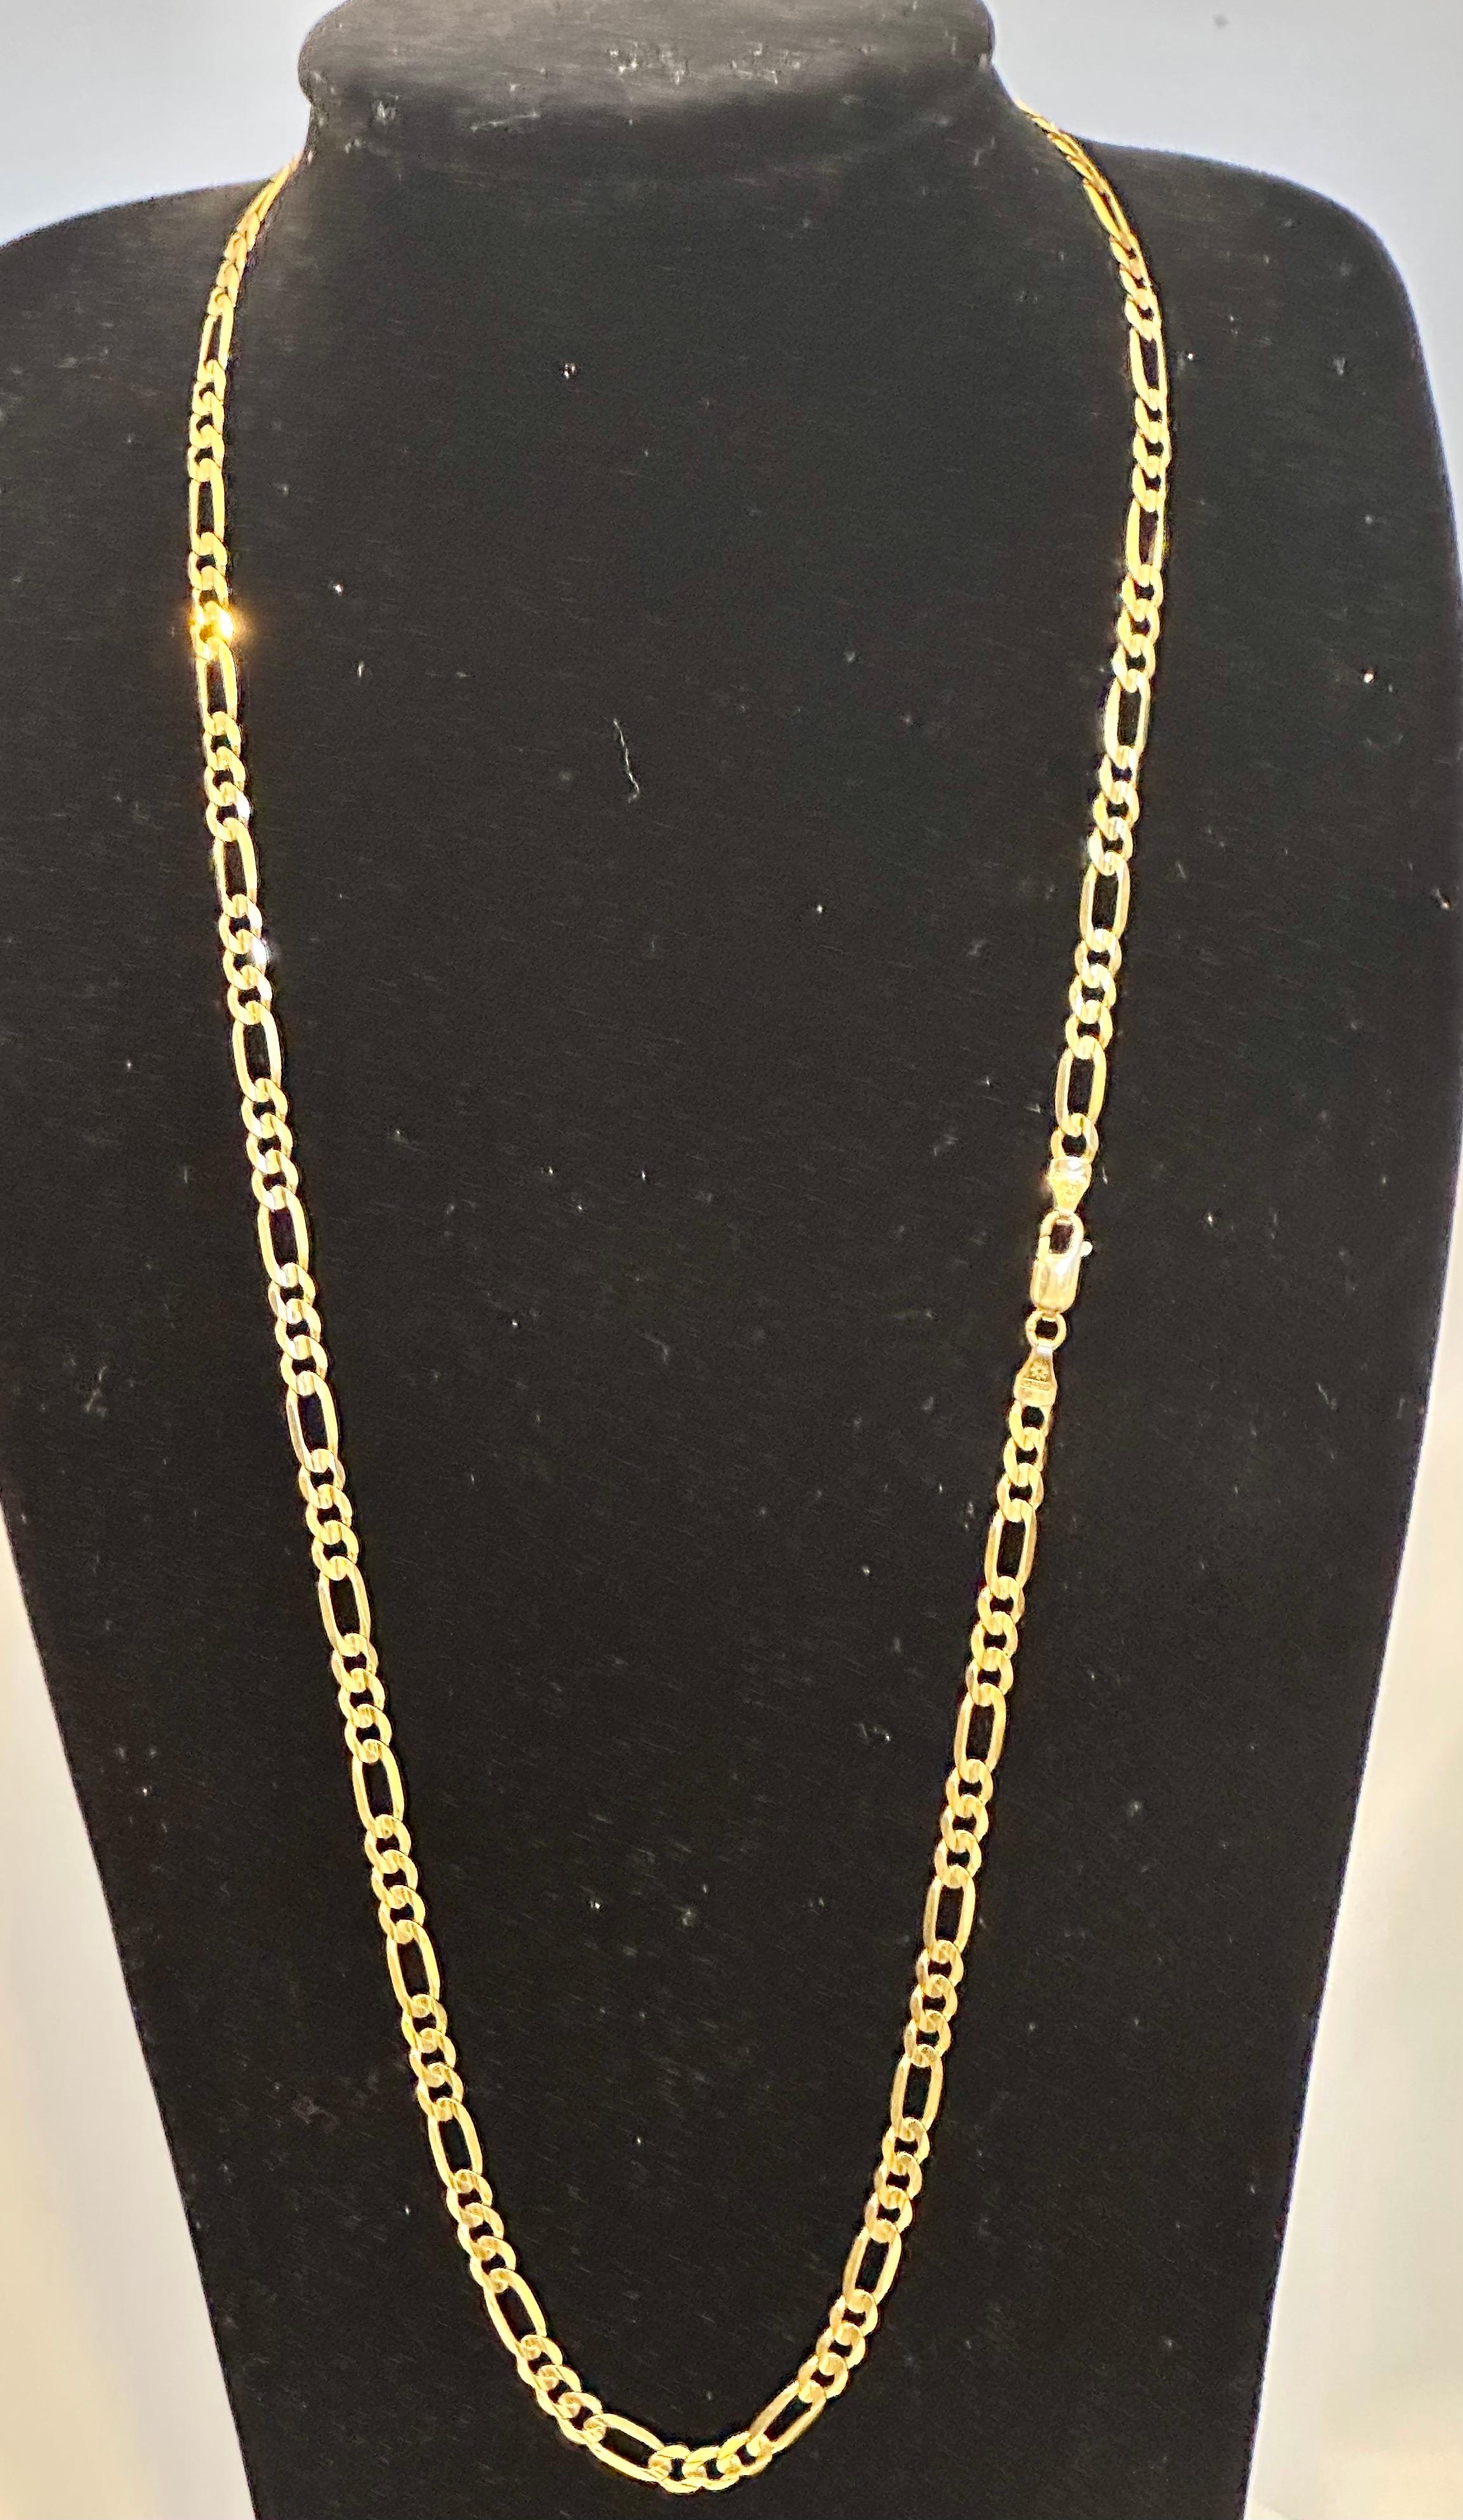 Vintage 18 Karat Yellow Gold 20 Gm Figaro Chain Necklace, Made in Italy 1